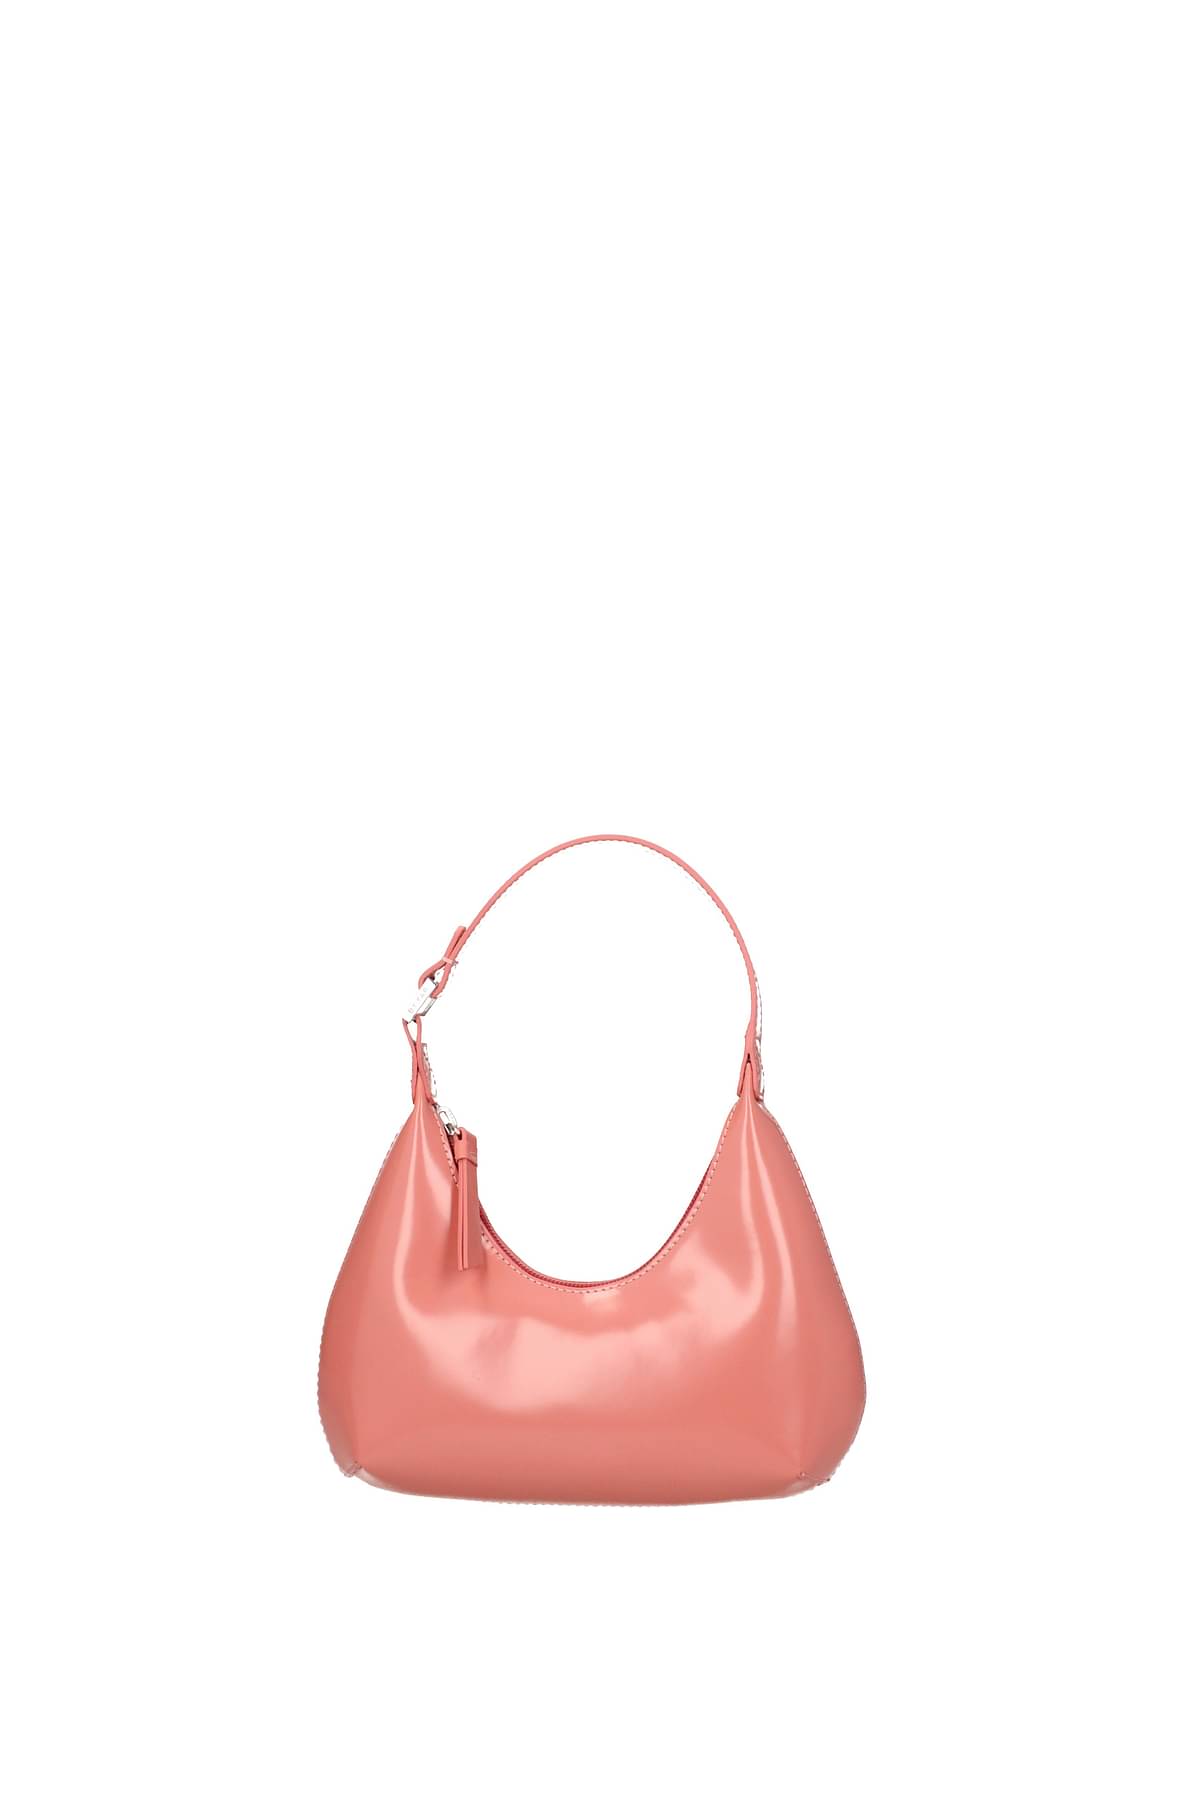 BY FAR, BABY AMBER BAG